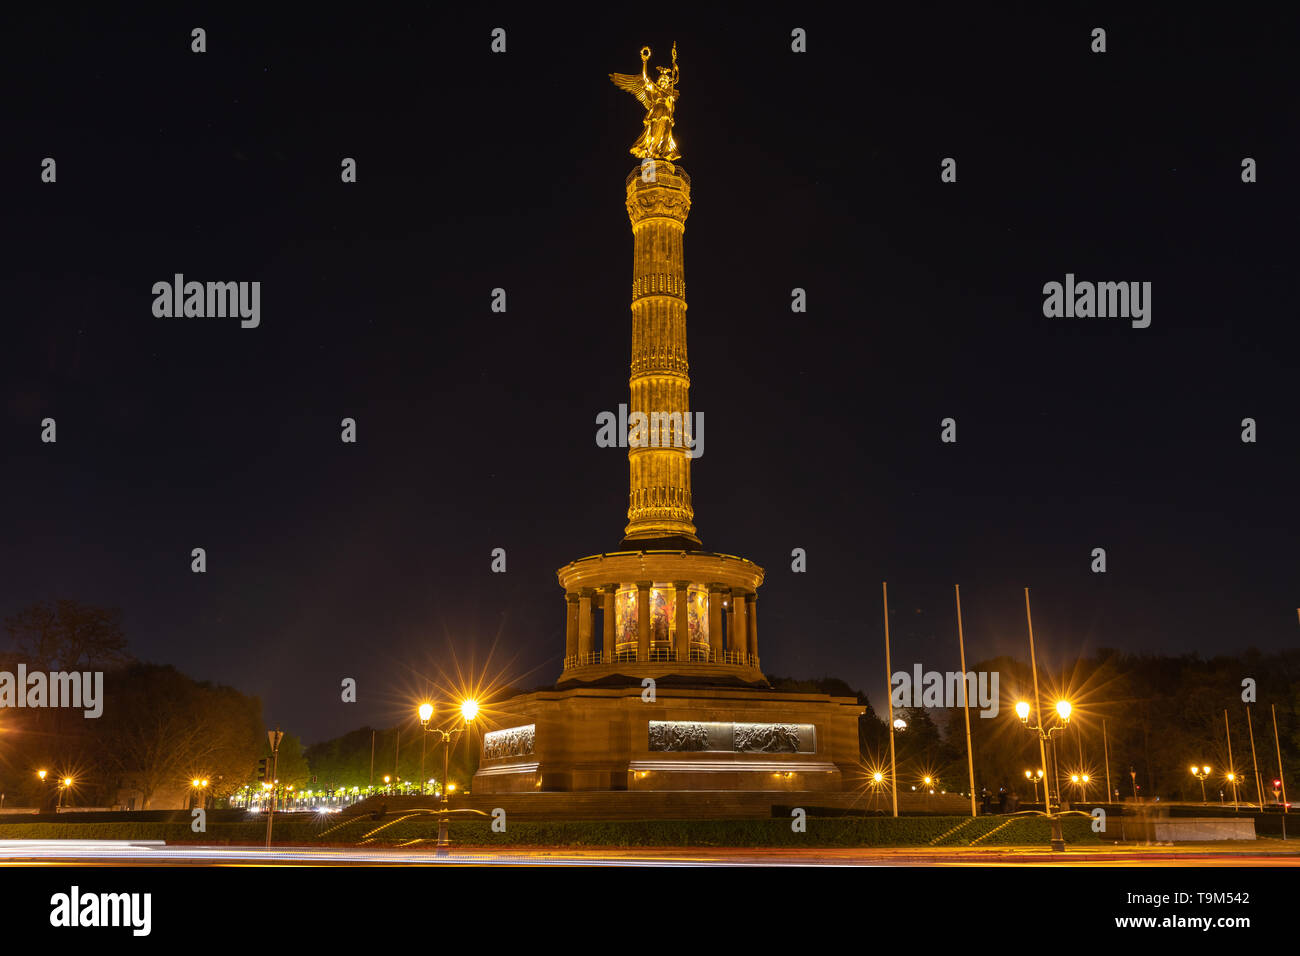 Night view of the Victory Column with the golden statue of Victoria on top, located at Great Star square in Berlin, Germany Stock Photo